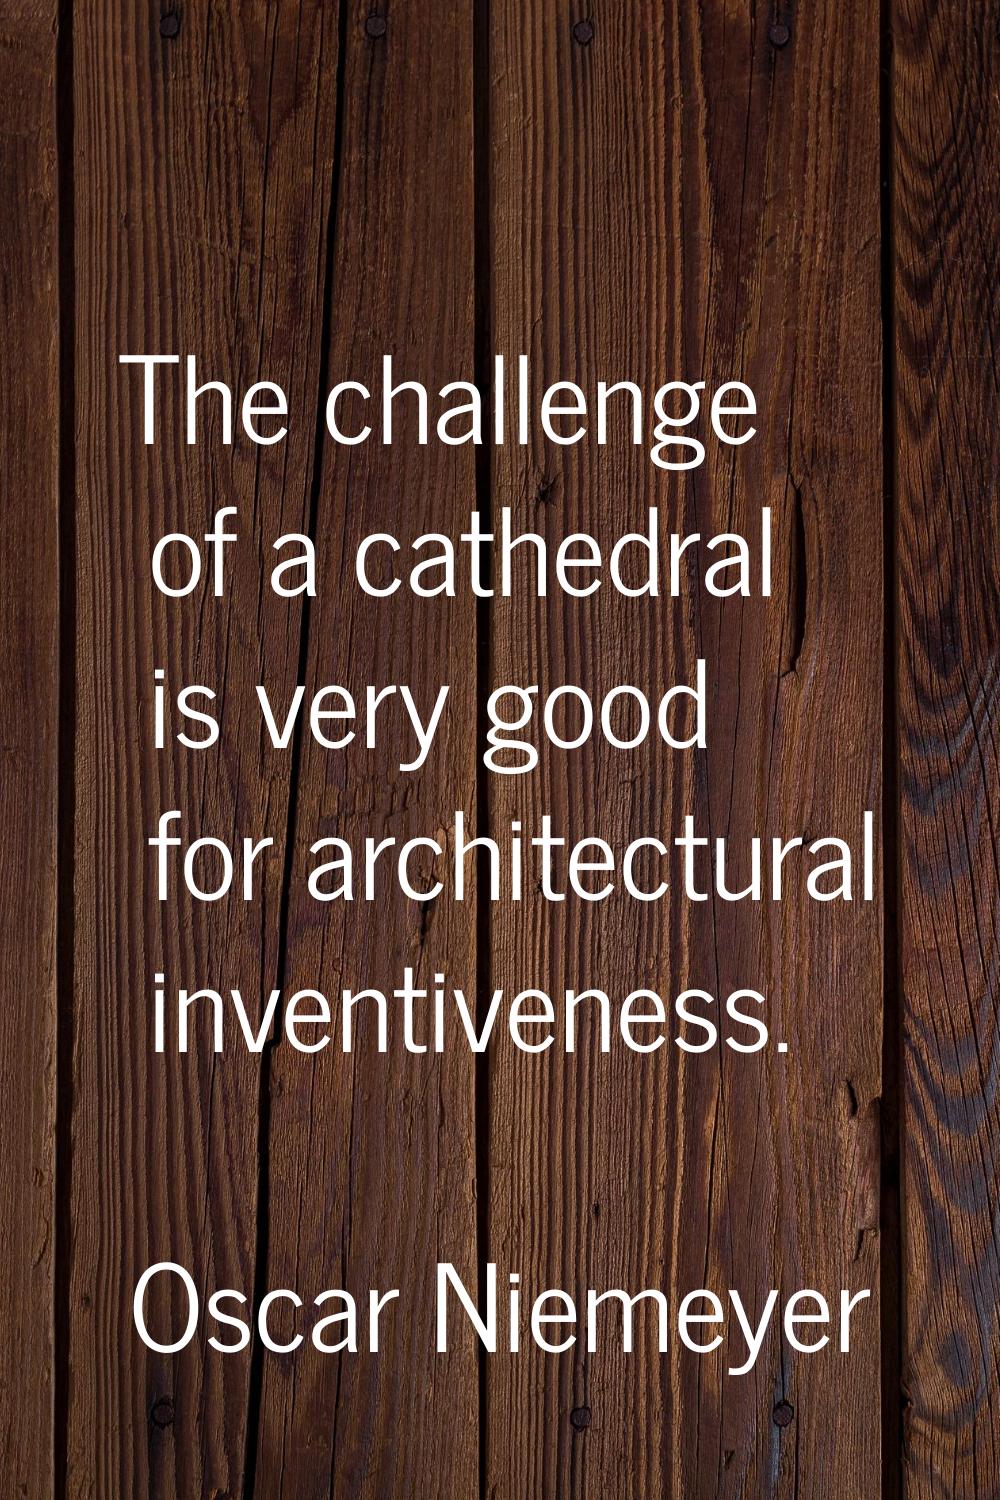 The challenge of a cathedral is very good for architectural inventiveness.